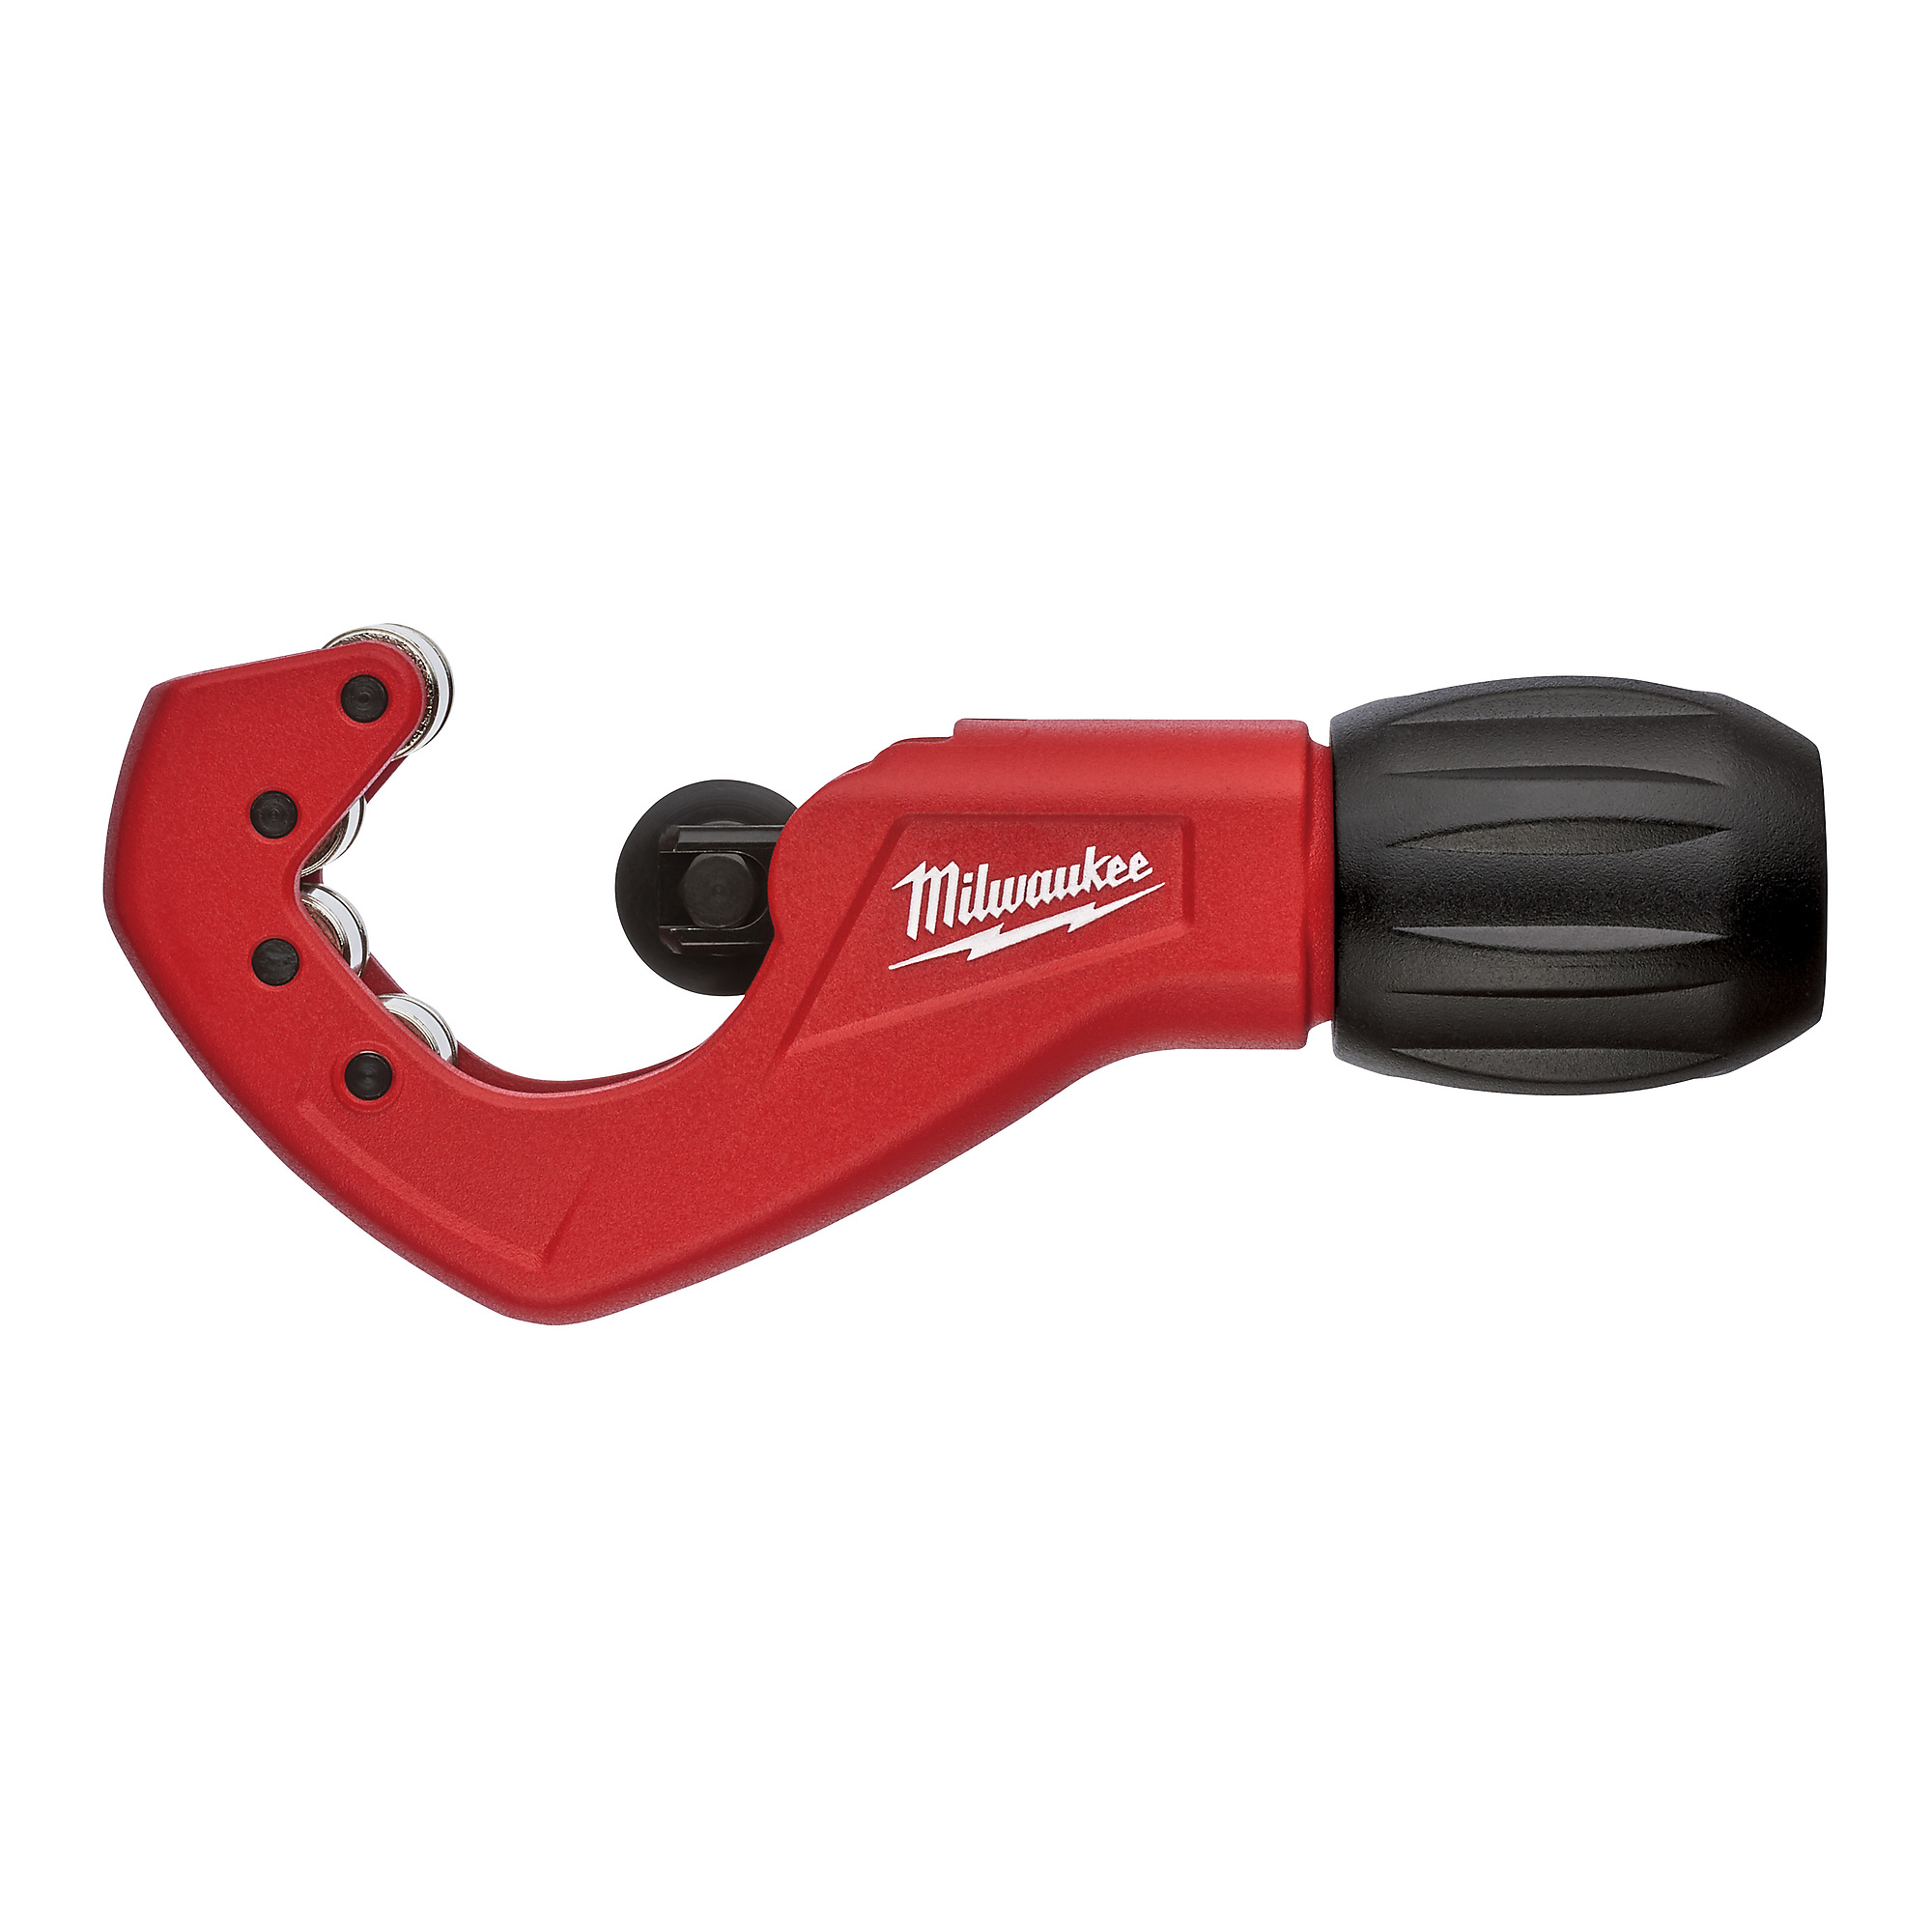 Milwaukee, 1Inch Constant Swing Copper Tubing Cutter, Max. Diameter 1 in, Blade Material Aluminum, Length 8.5 in, Model 48-22-4259